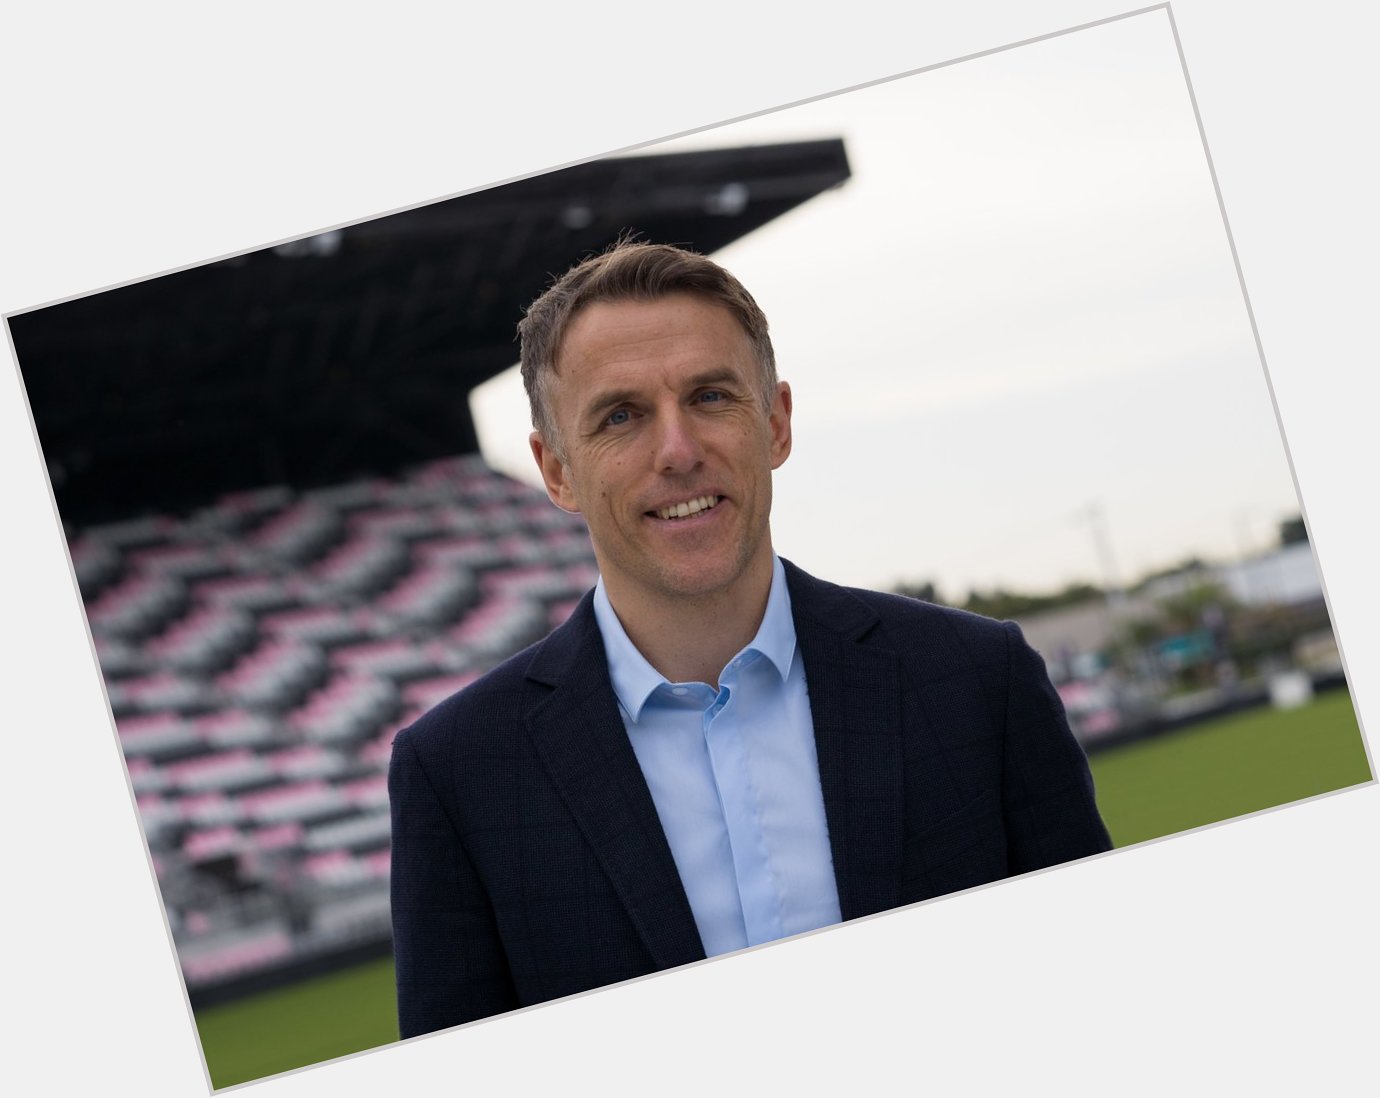 Join us in wishing a very happy birthday to head coach, Phil Neville!  